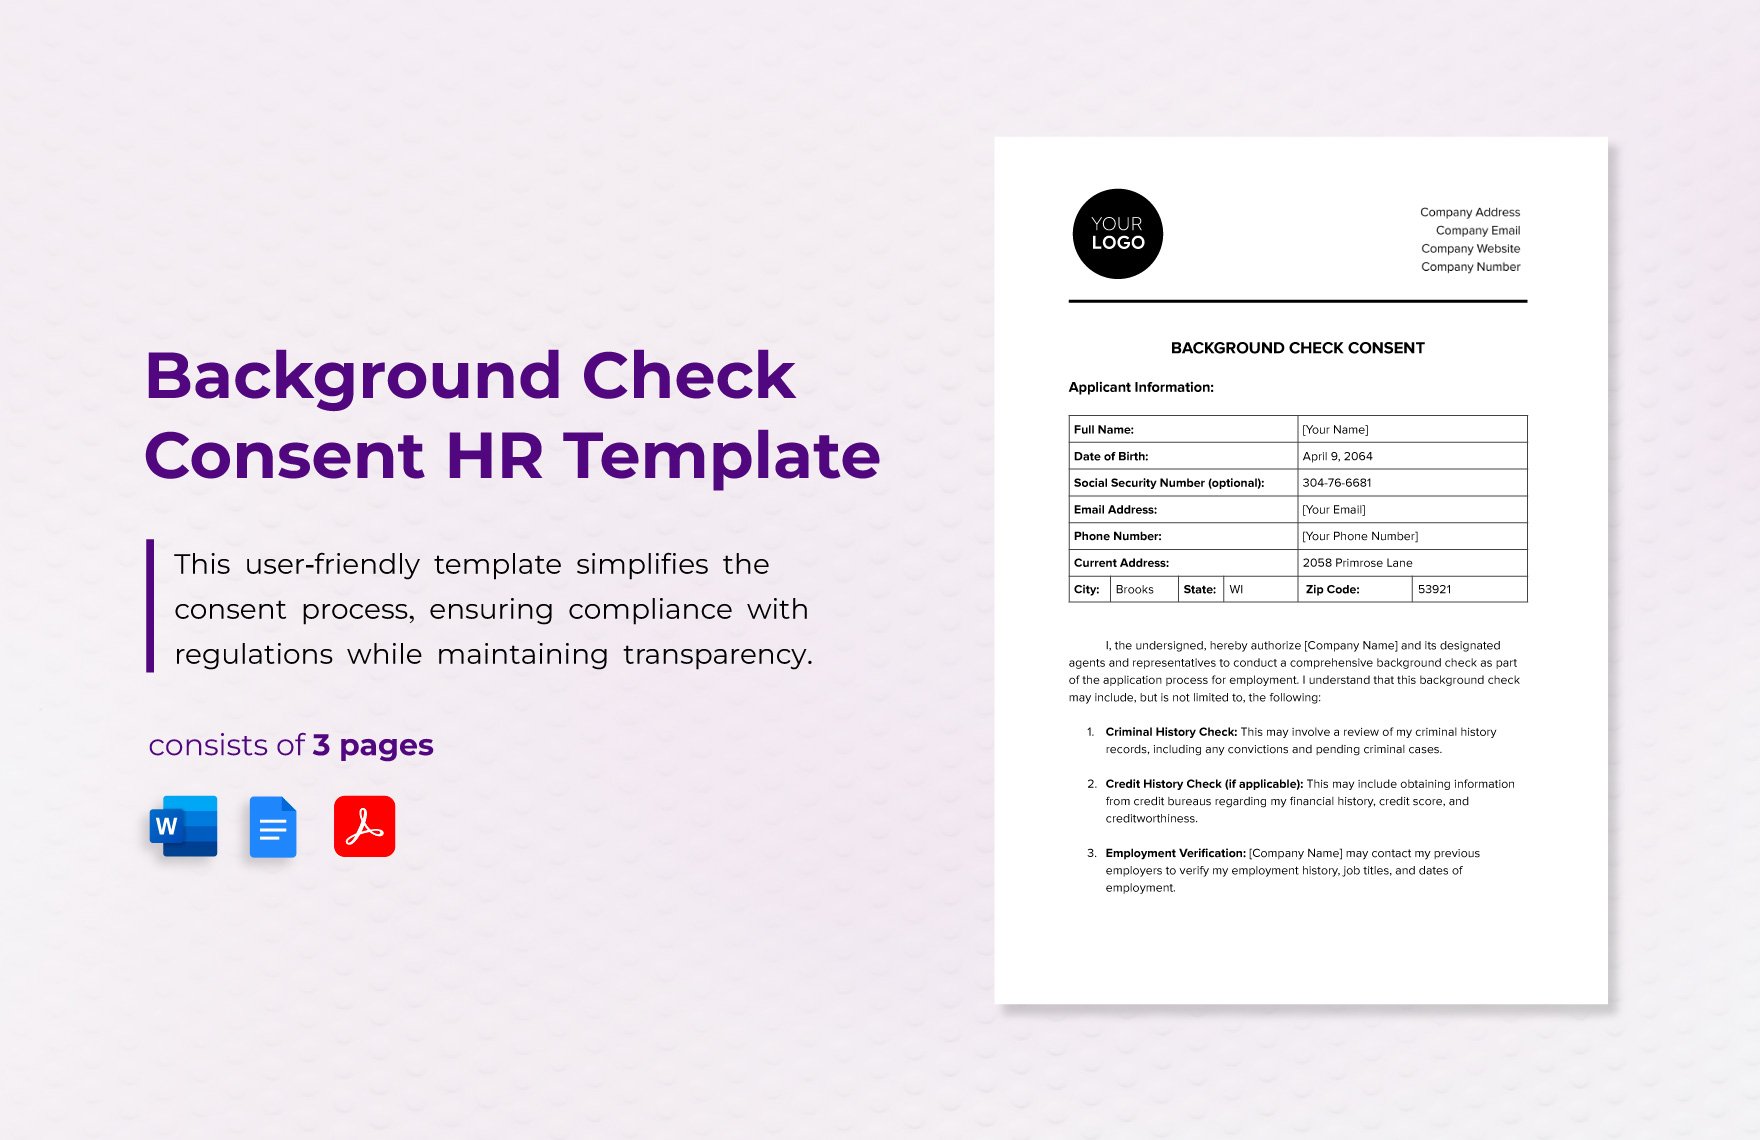 Background Check Consent HR Template in Word, Google Docs, PDF